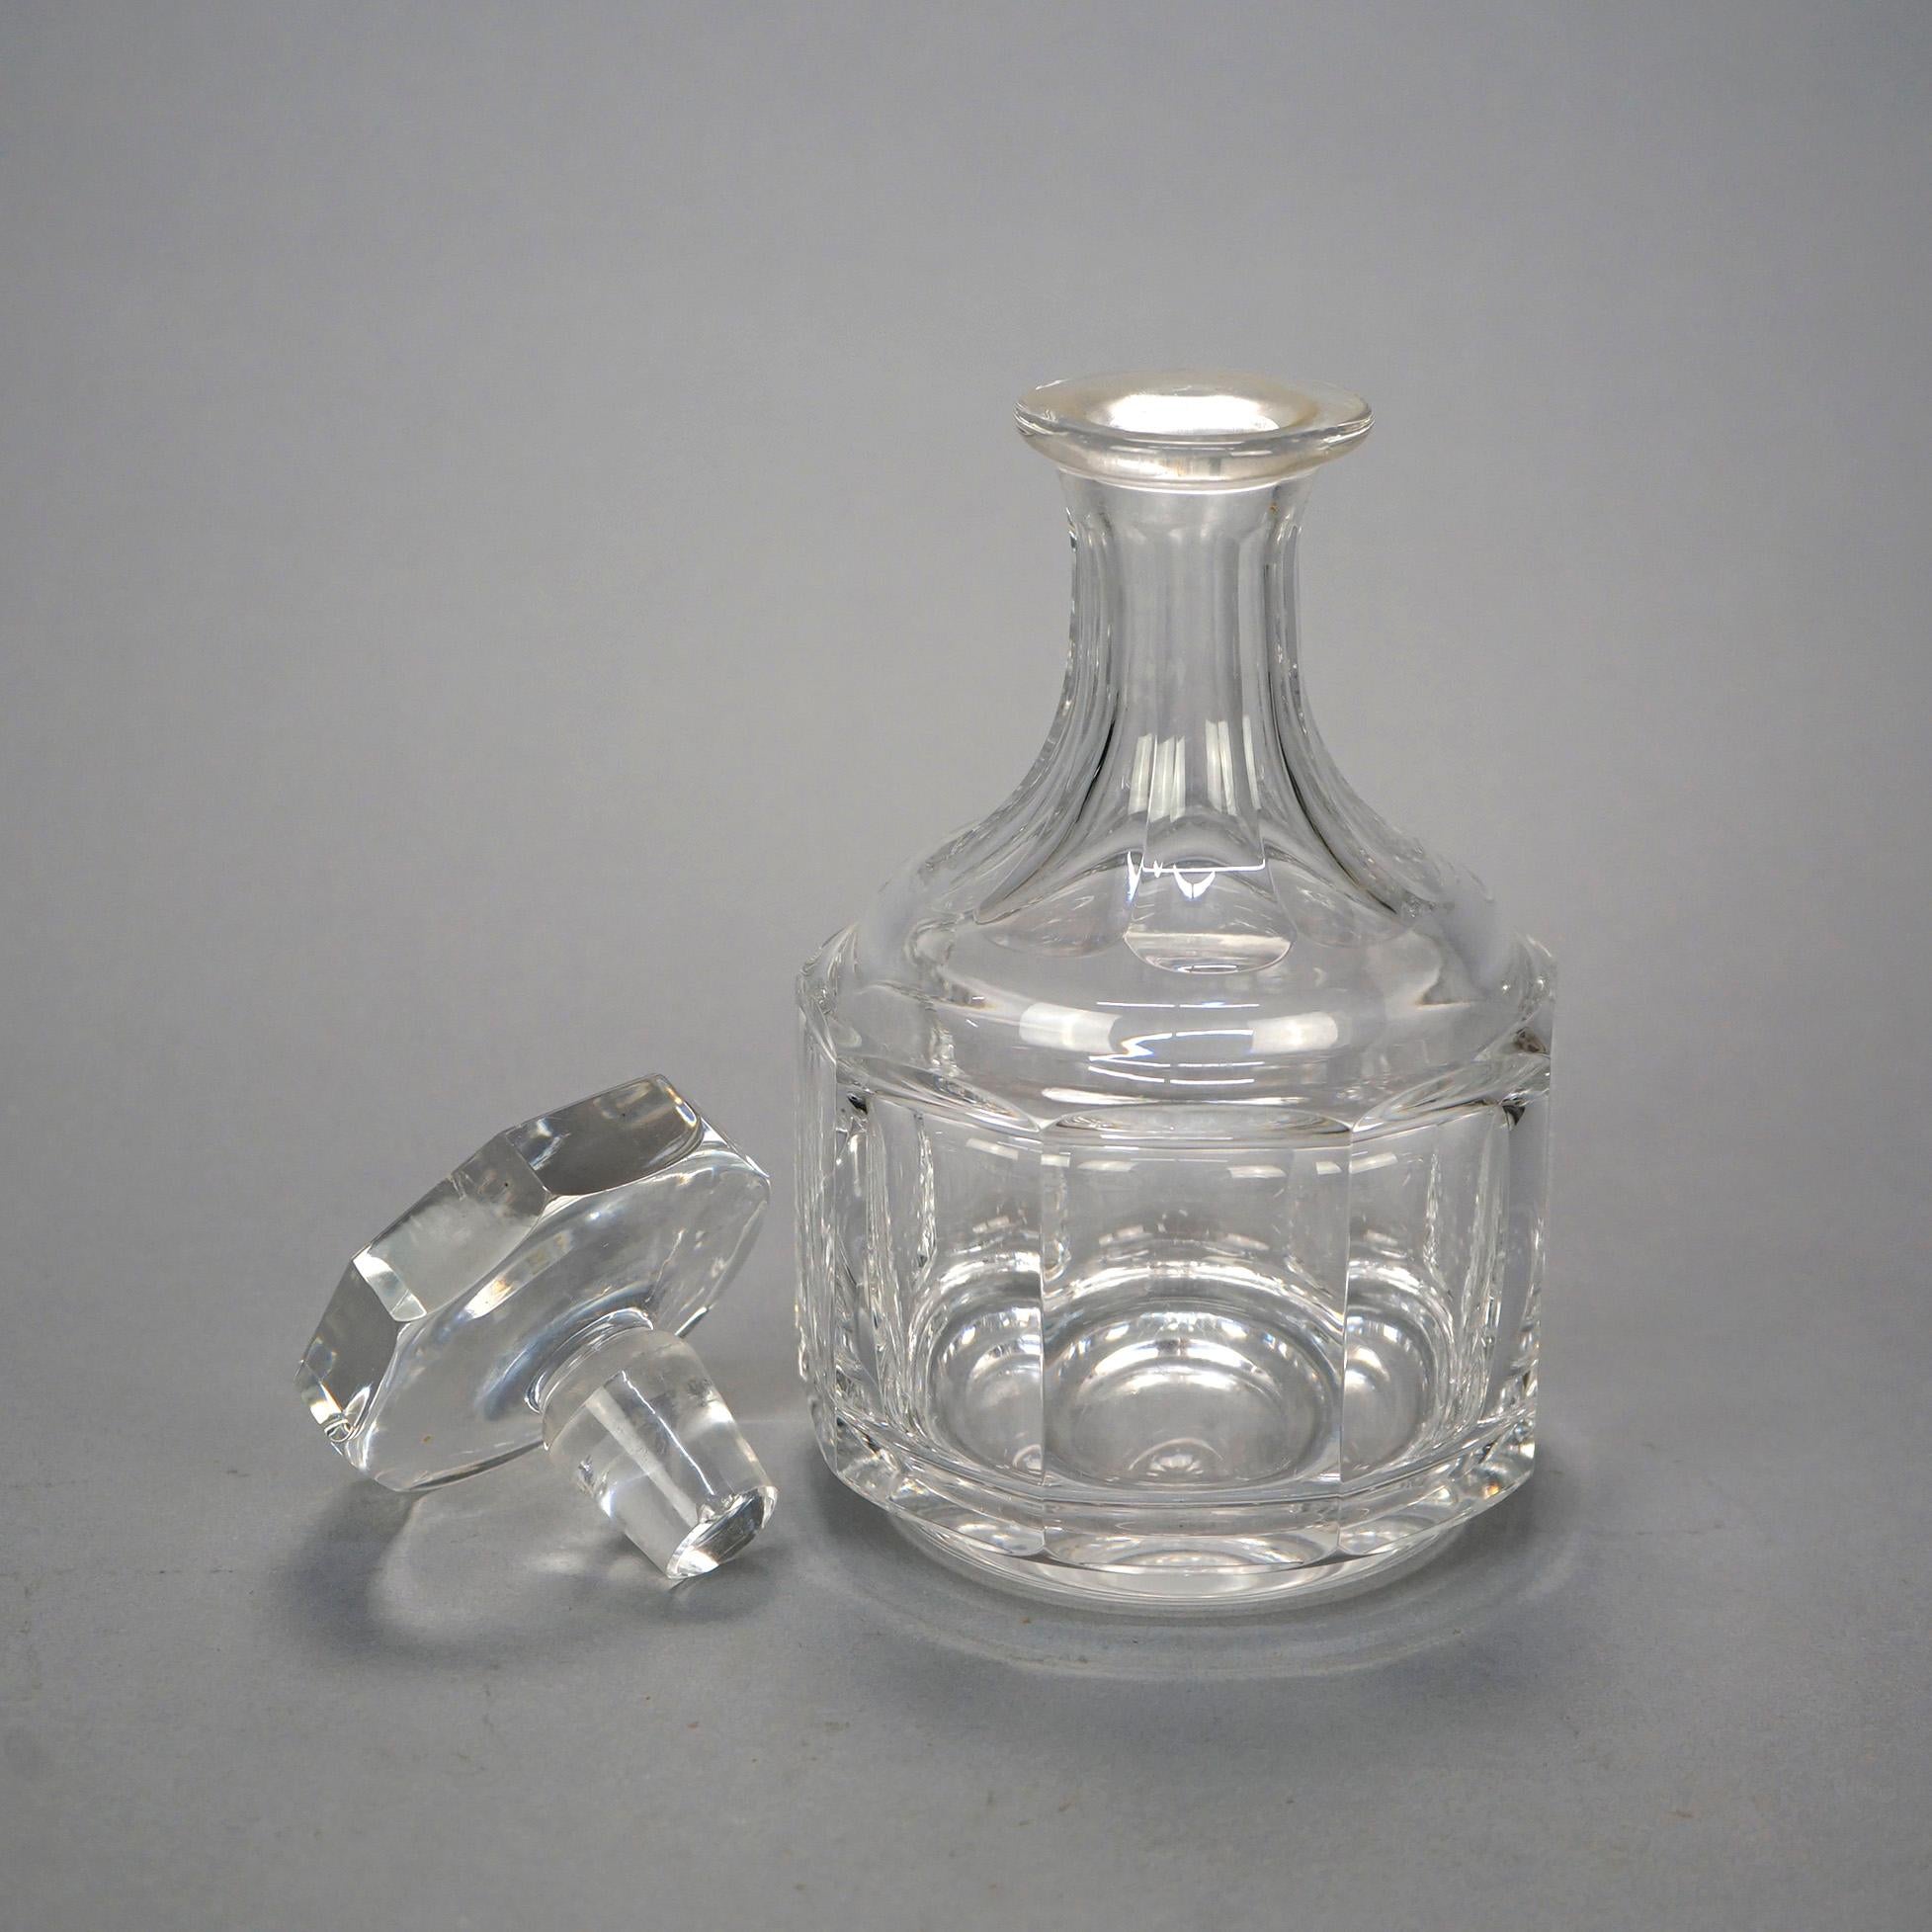 A spirits decanter by Kosta Boda offers lead crystal vessel in faceted form with stopper, maker signed, 20th century

Measures- 9.5''H x 5''W x 5''D.

Catalogue Note: Ask about DISCOUNTED DELIVERY RATES available to most regions within 1,500 miles